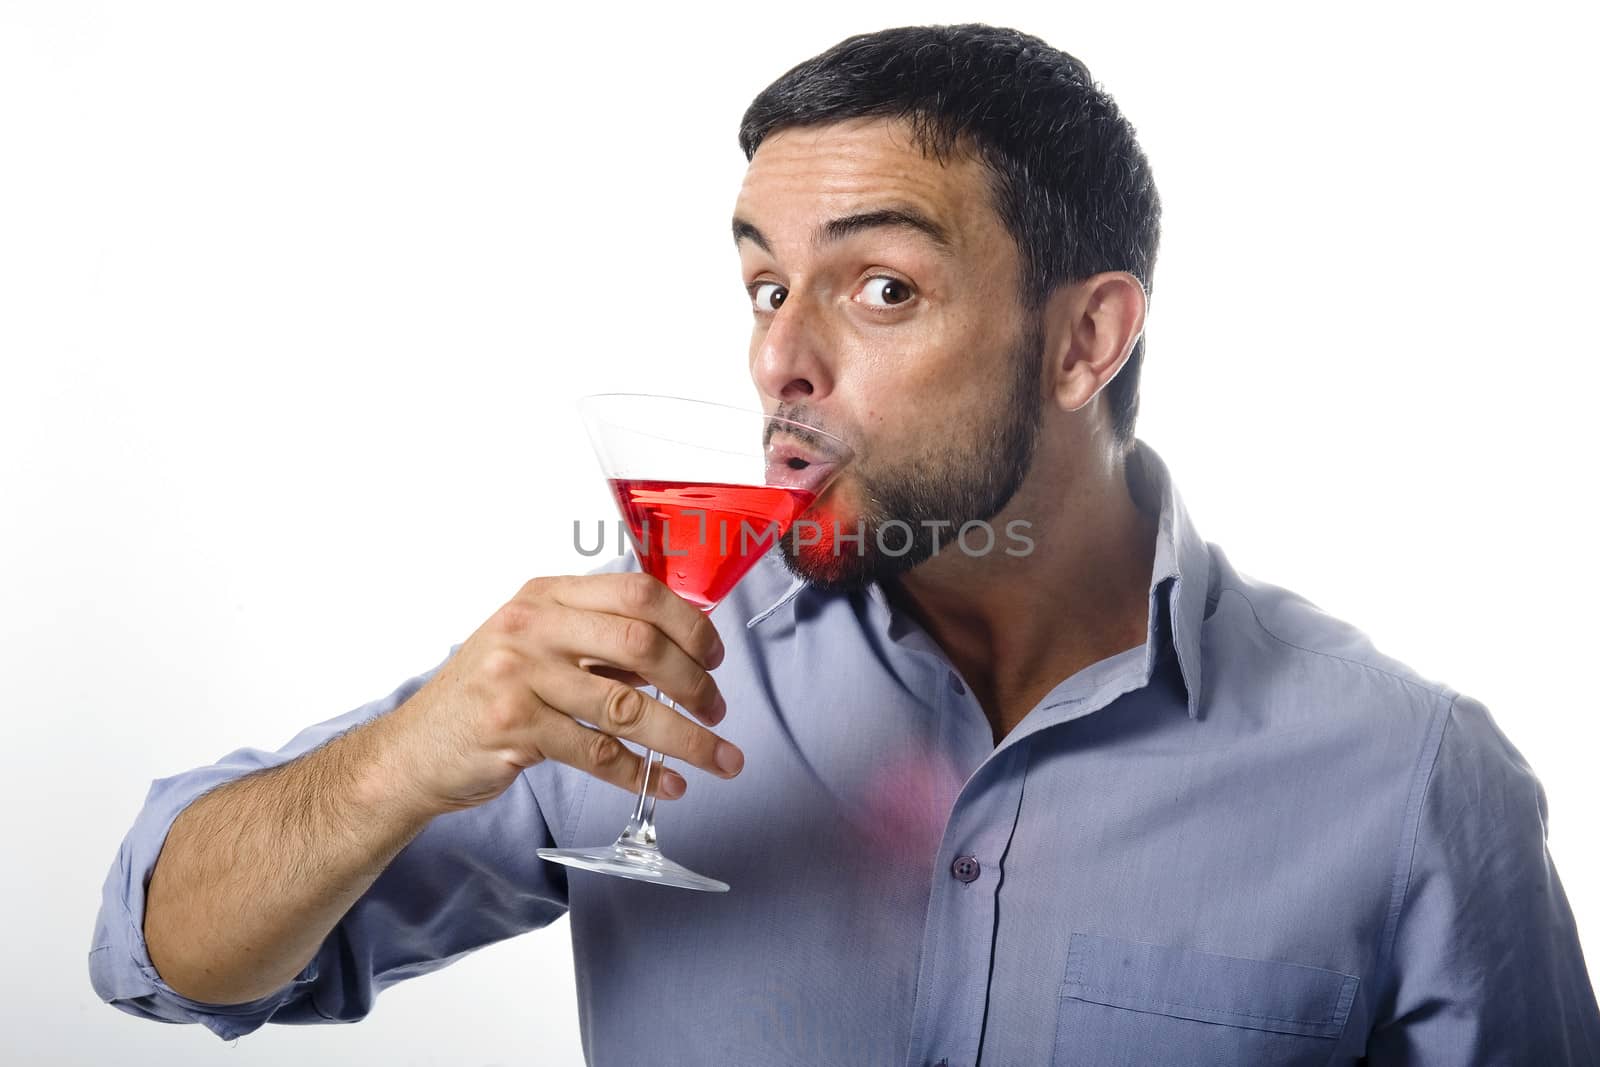 Young Man with Beard Drinking Cocktail  Isolated on White Background